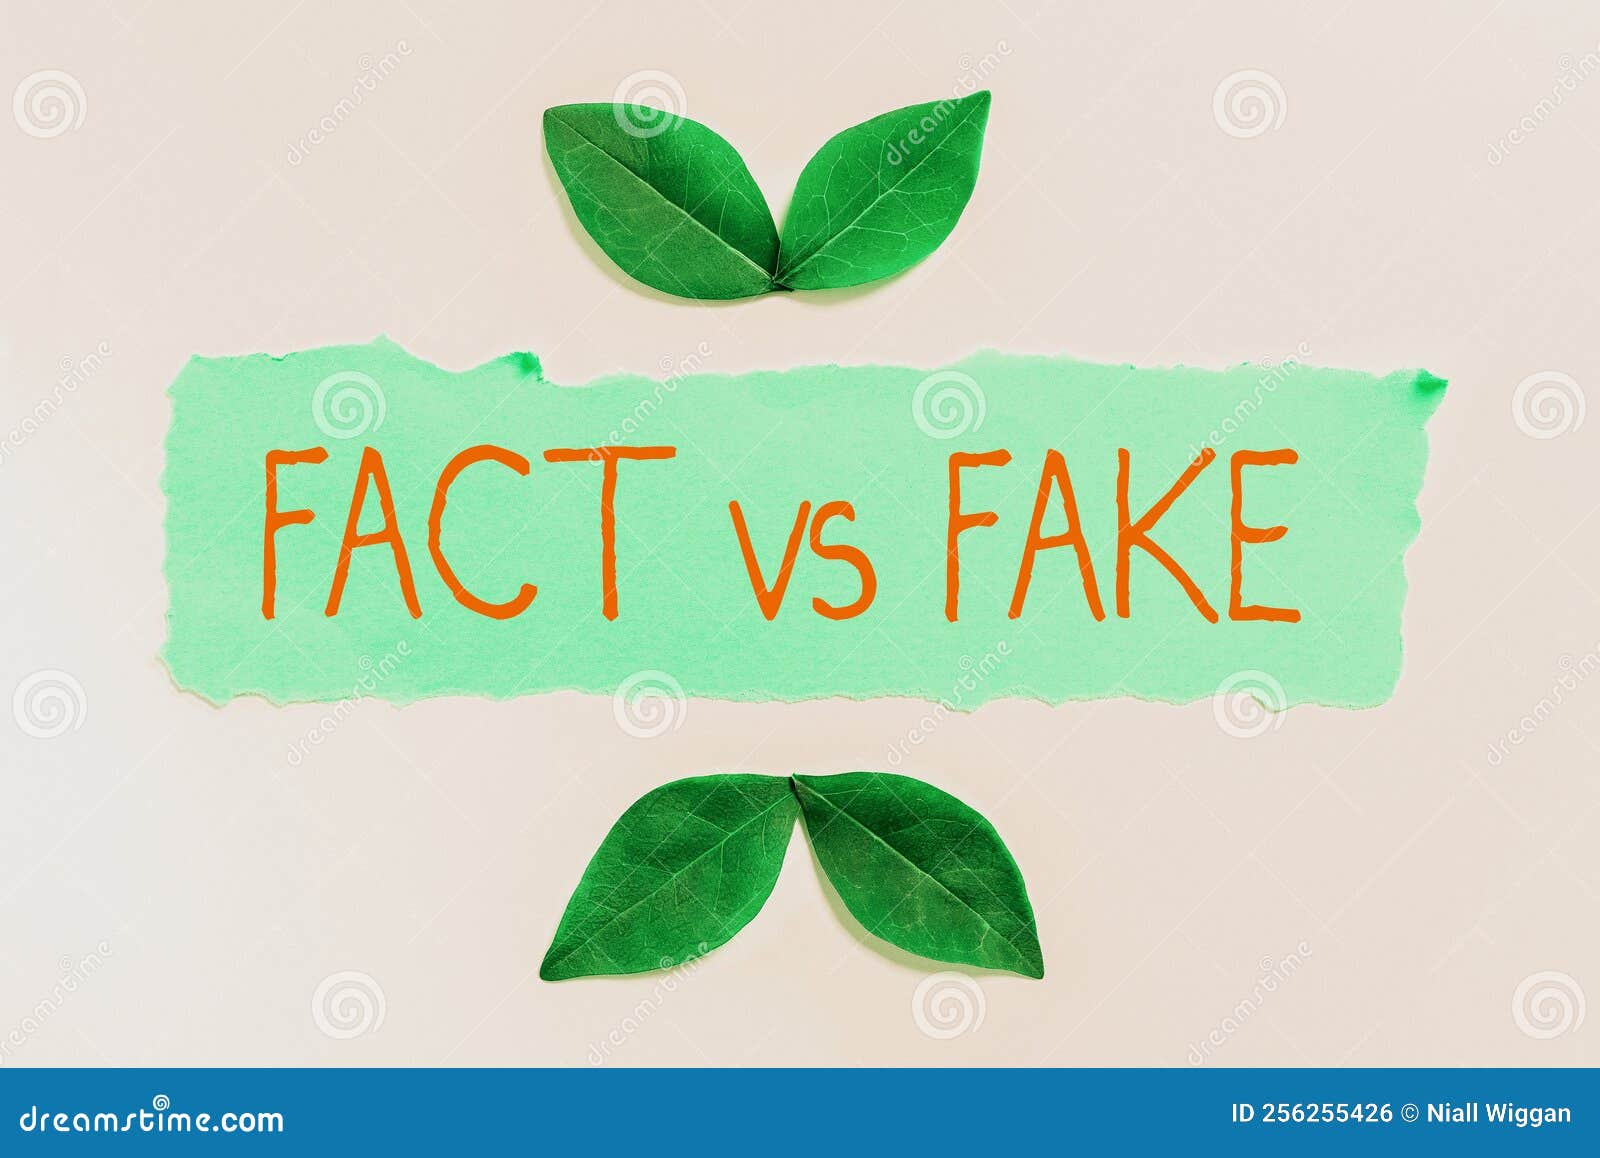 conceptual display fact vs fake. word written on rivalry or products or information originaly made or imitation